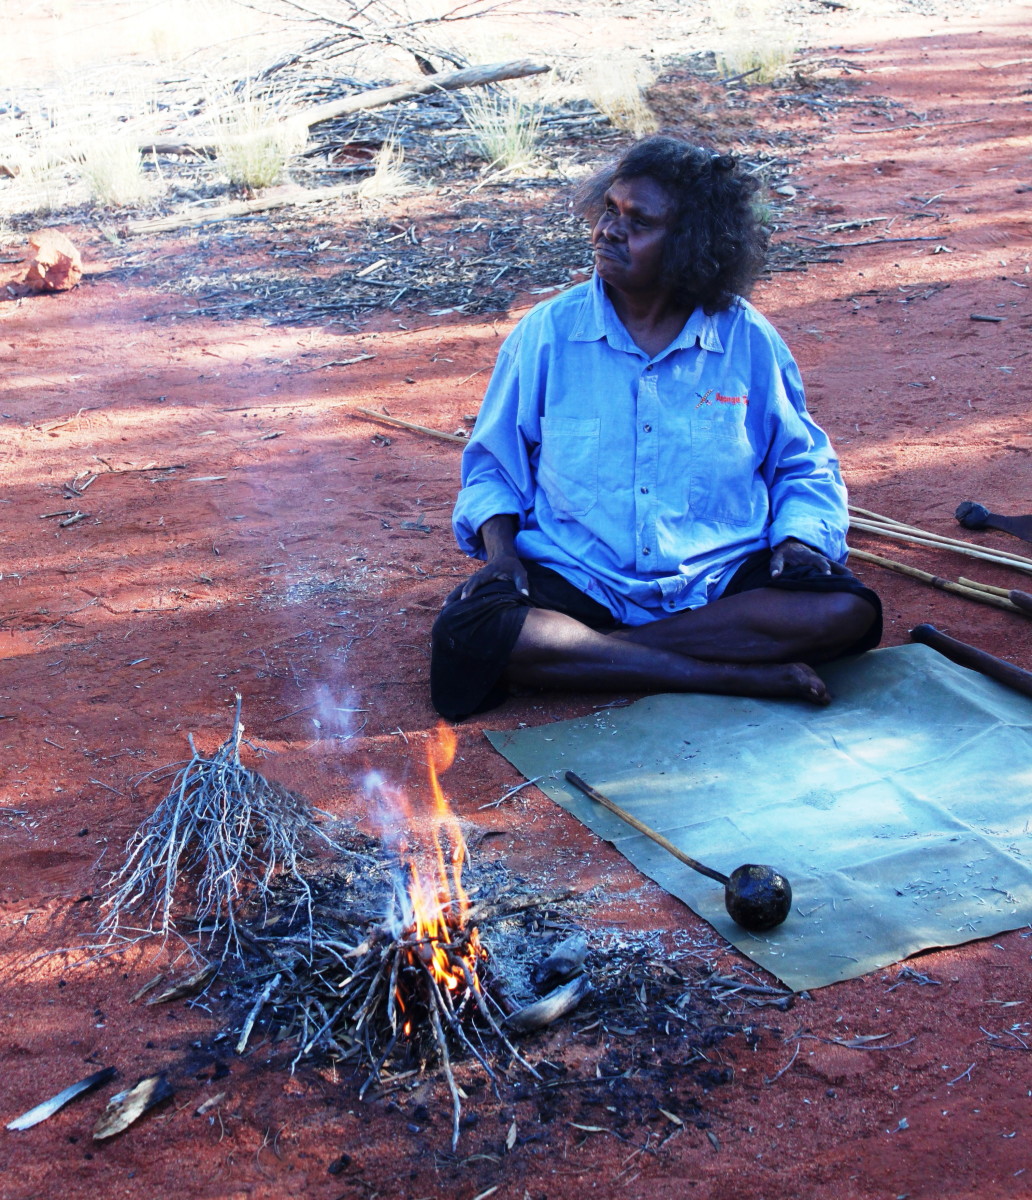 Fire-making in the Outback. Copyright 2011, Bill Yovino